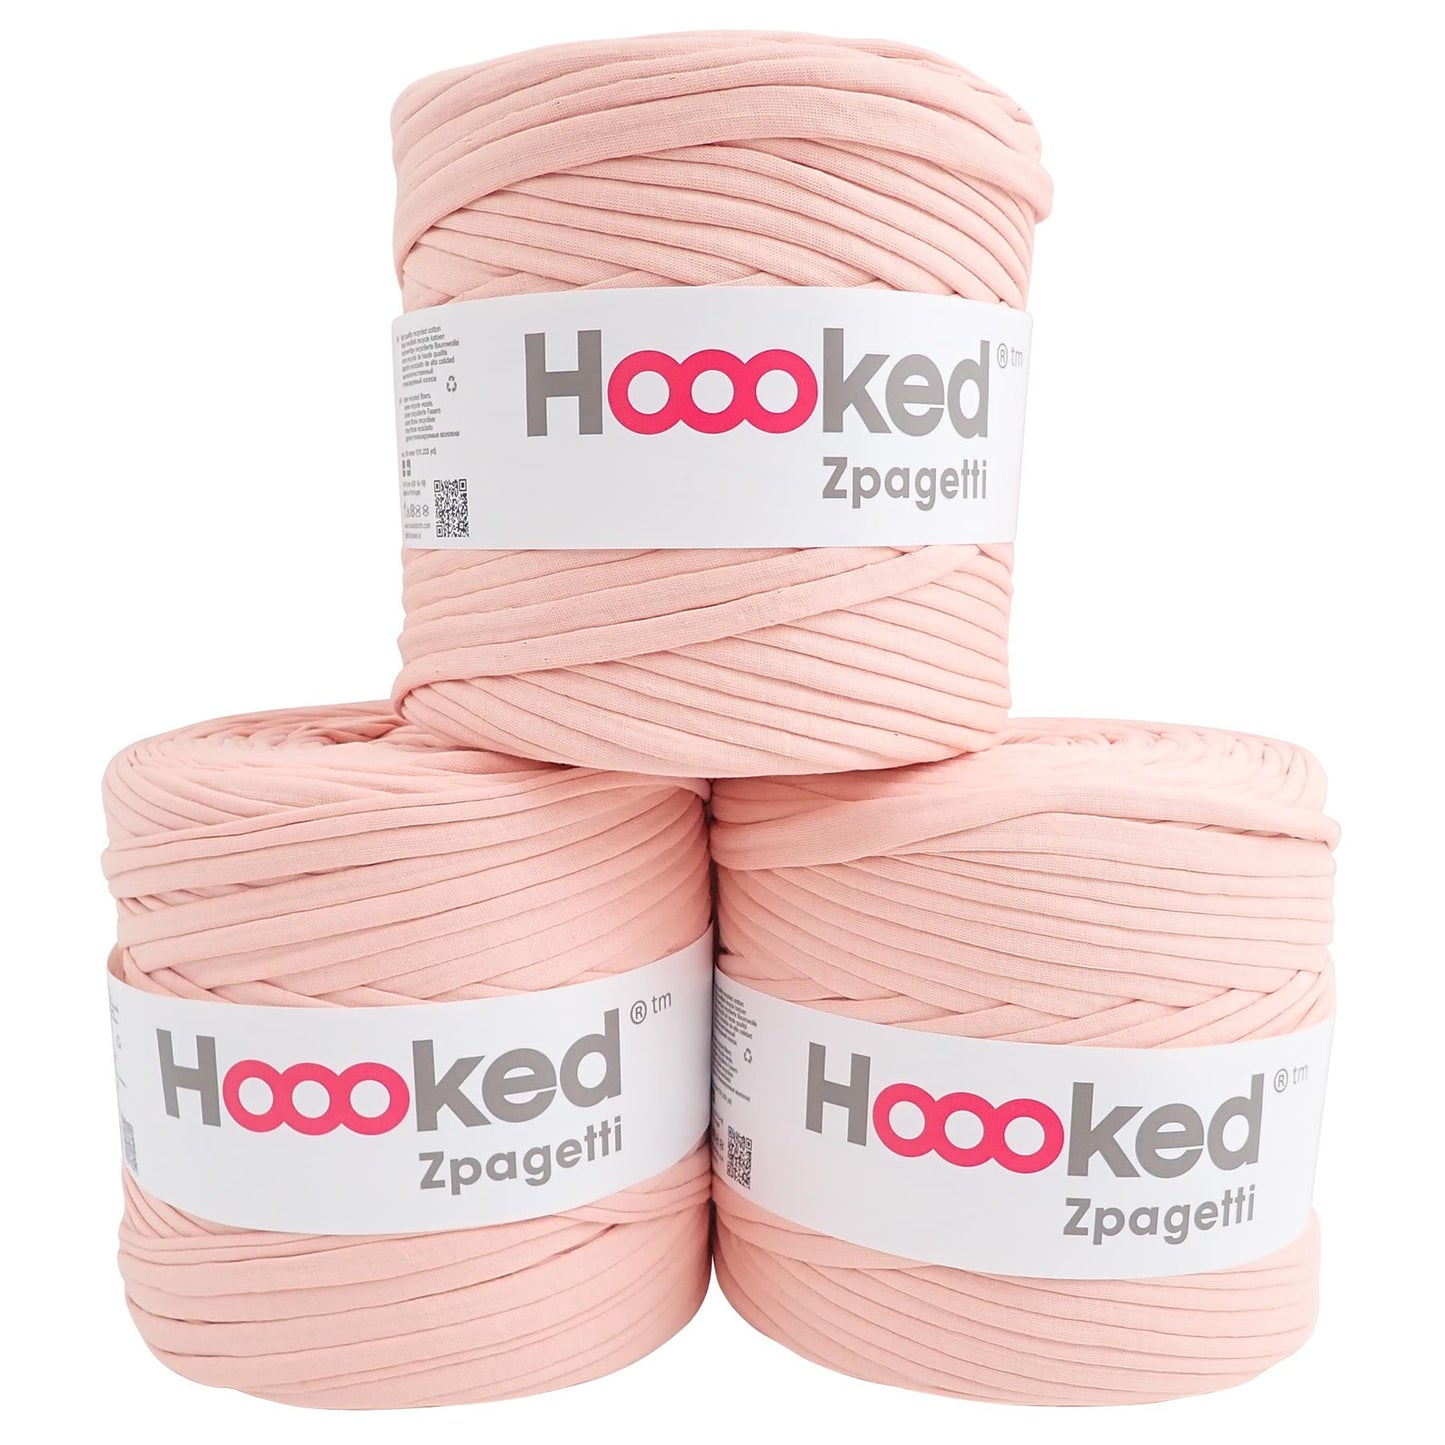 Hoooked Zpagetti Peach Cotton T-Shirt Yarn - 120M 700g (Pack of 3)